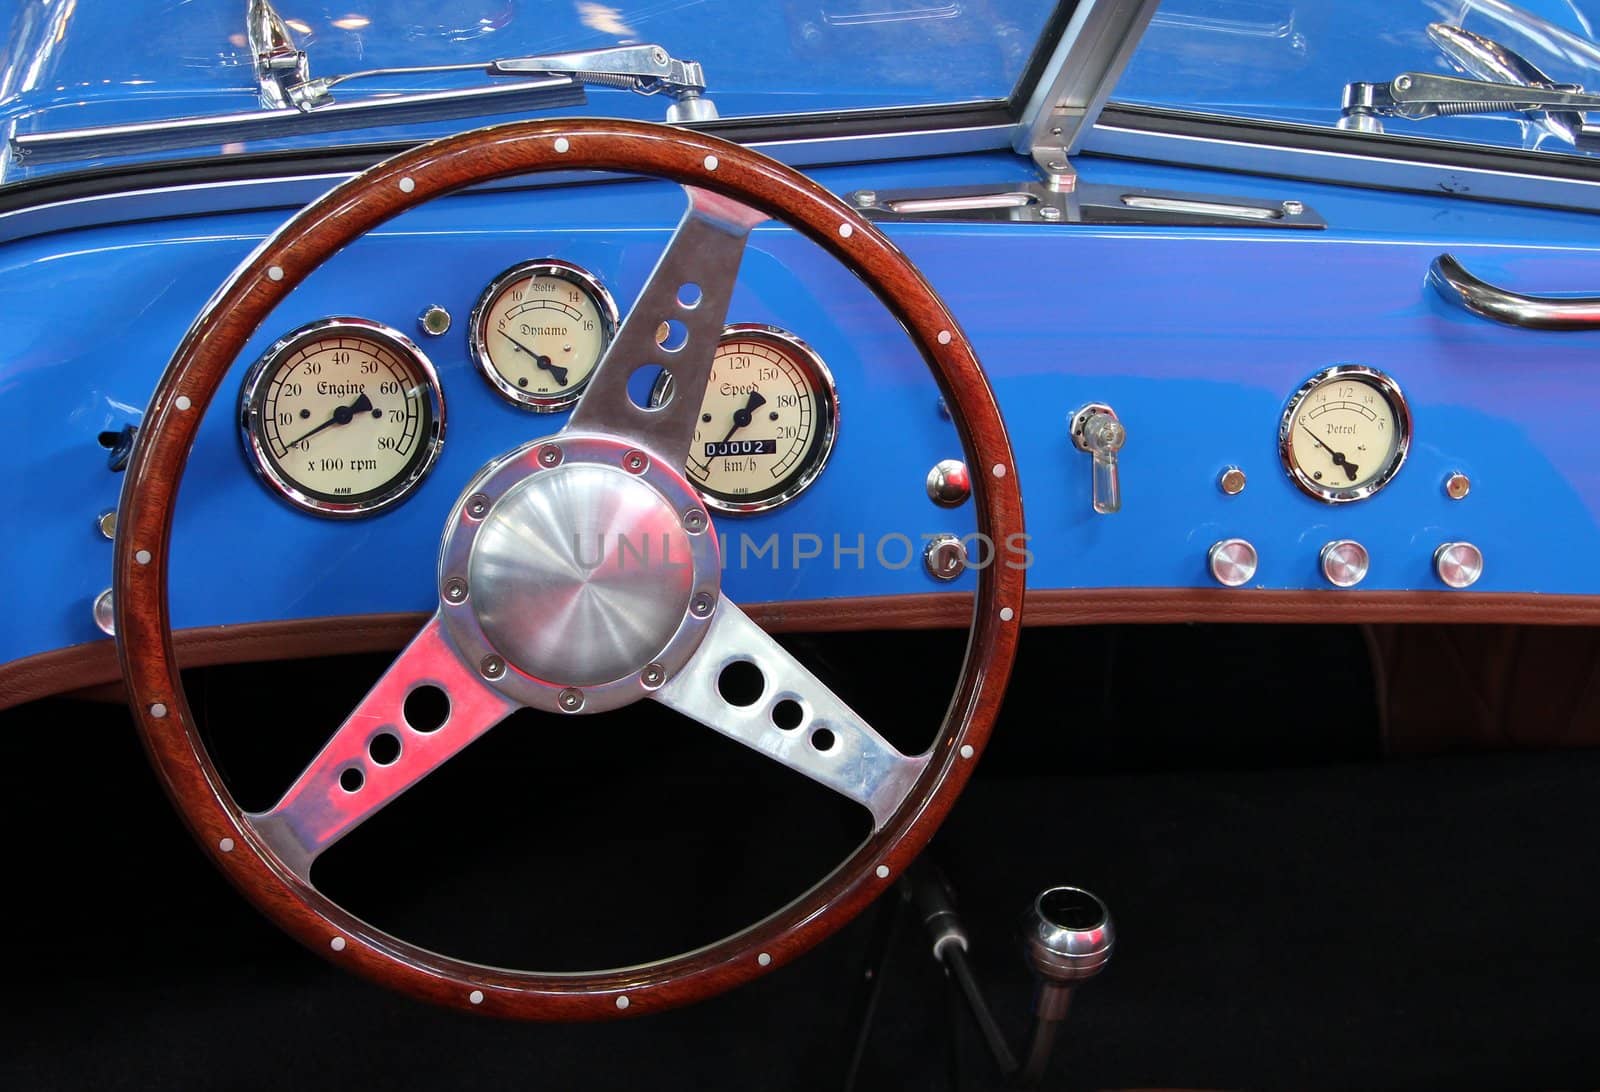 Vintage sports car with blue instrument panel.